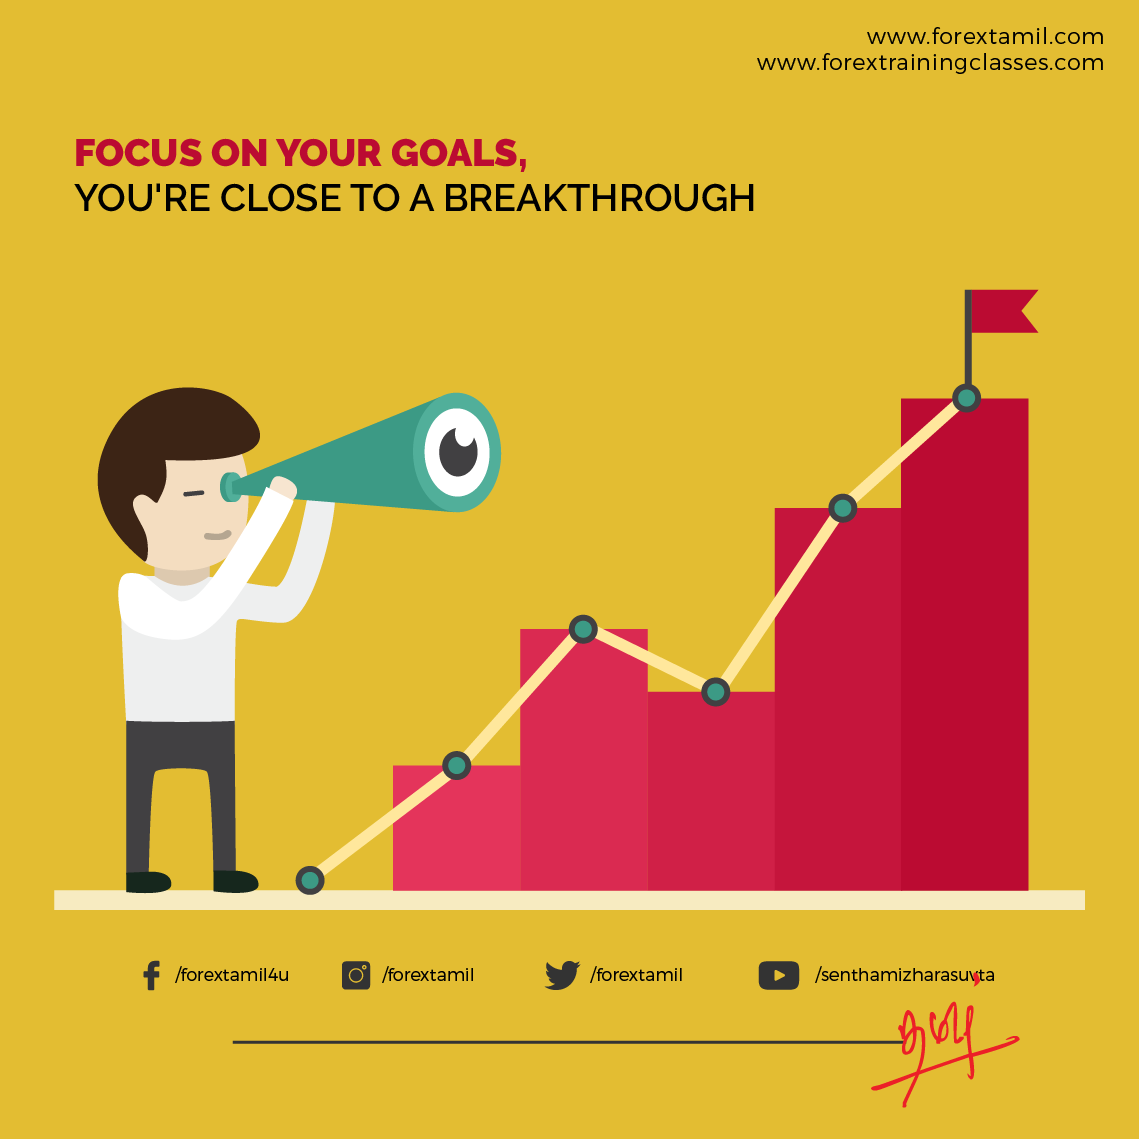 Focus on your goals, you're close to a breakthrough

#forextrading #forexguru #forextradingcoach #forexeducation #forextradingtips #forexquotes #learnforextrading #bestforexcoachdubai #forexcoachhatta #bestforexteacherAlain #forexmotivation #ForexDubai, #ForexBrokersinUAE